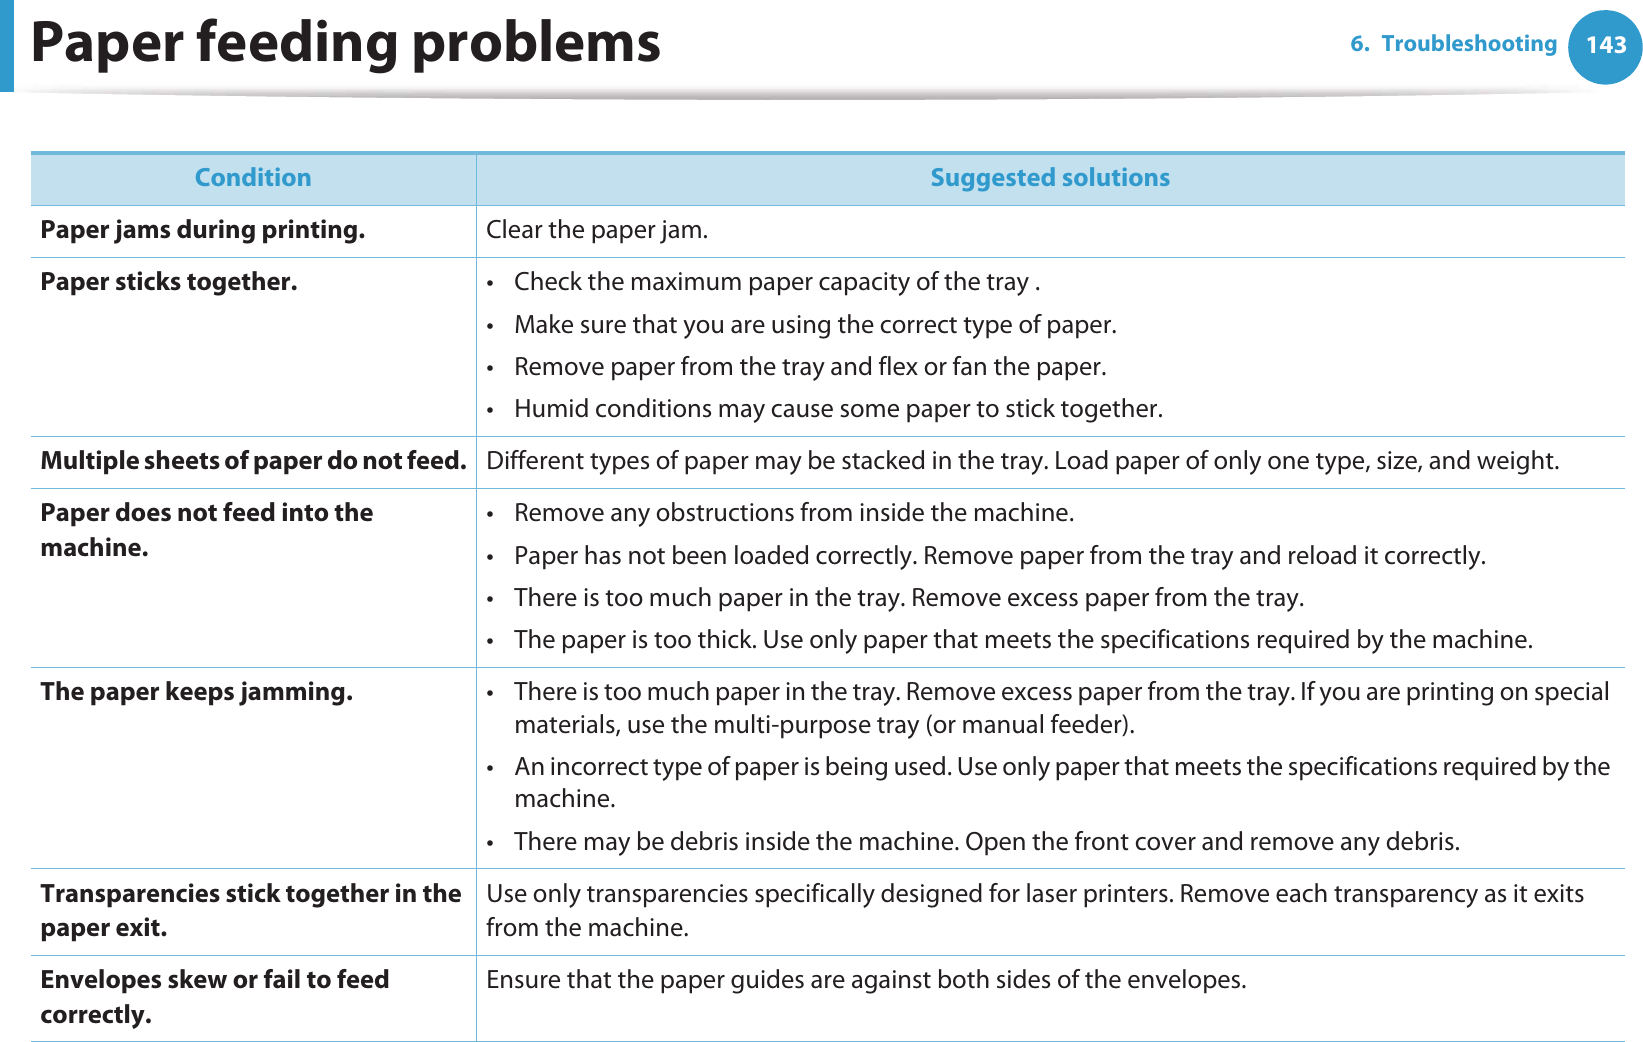 1436. TroubleshootingPaper feeding problems  Condition Suggested solutionsPaper jams during printing. Clear the paper jam.Paper sticks together. • Check the maximum paper capacity of the tray .• Make sure that you are using the correct type of paper.• Remove paper from the tray and flex or fan the paper.• Humid conditions may cause some paper to stick together.Multiple sheets of paper do not feed. Different types of paper may be stacked in the tray. Load paper of only one type, size, and weight.Paper does not feed into the machine.• Remove any obstructions from inside the machine.• Paper has not been loaded correctly. Remove paper from the tray and reload it correctly.• There is too much paper in the tray. Remove excess paper from the tray.• The paper is too thick. Use only paper that meets the specifications required by the machine.The paper keeps jamming. • There is too much paper in the tray. Remove excess paper from the tray. If you are printing on special materials, use the multi-purpose tray (or manual feeder).• An incorrect type of paper is being used. Use only paper that meets the specifications required by the machine.• There may be debris inside the machine. Open the front cover and remove any debris.Transparencies stick together in the paper exit.Use only transparencies specifically designed for laser printers. Remove each transparency as it exits from the machine.Envelopes skew or fail to feed correctly.Ensure that the paper guides are against both sides of the envelopes.